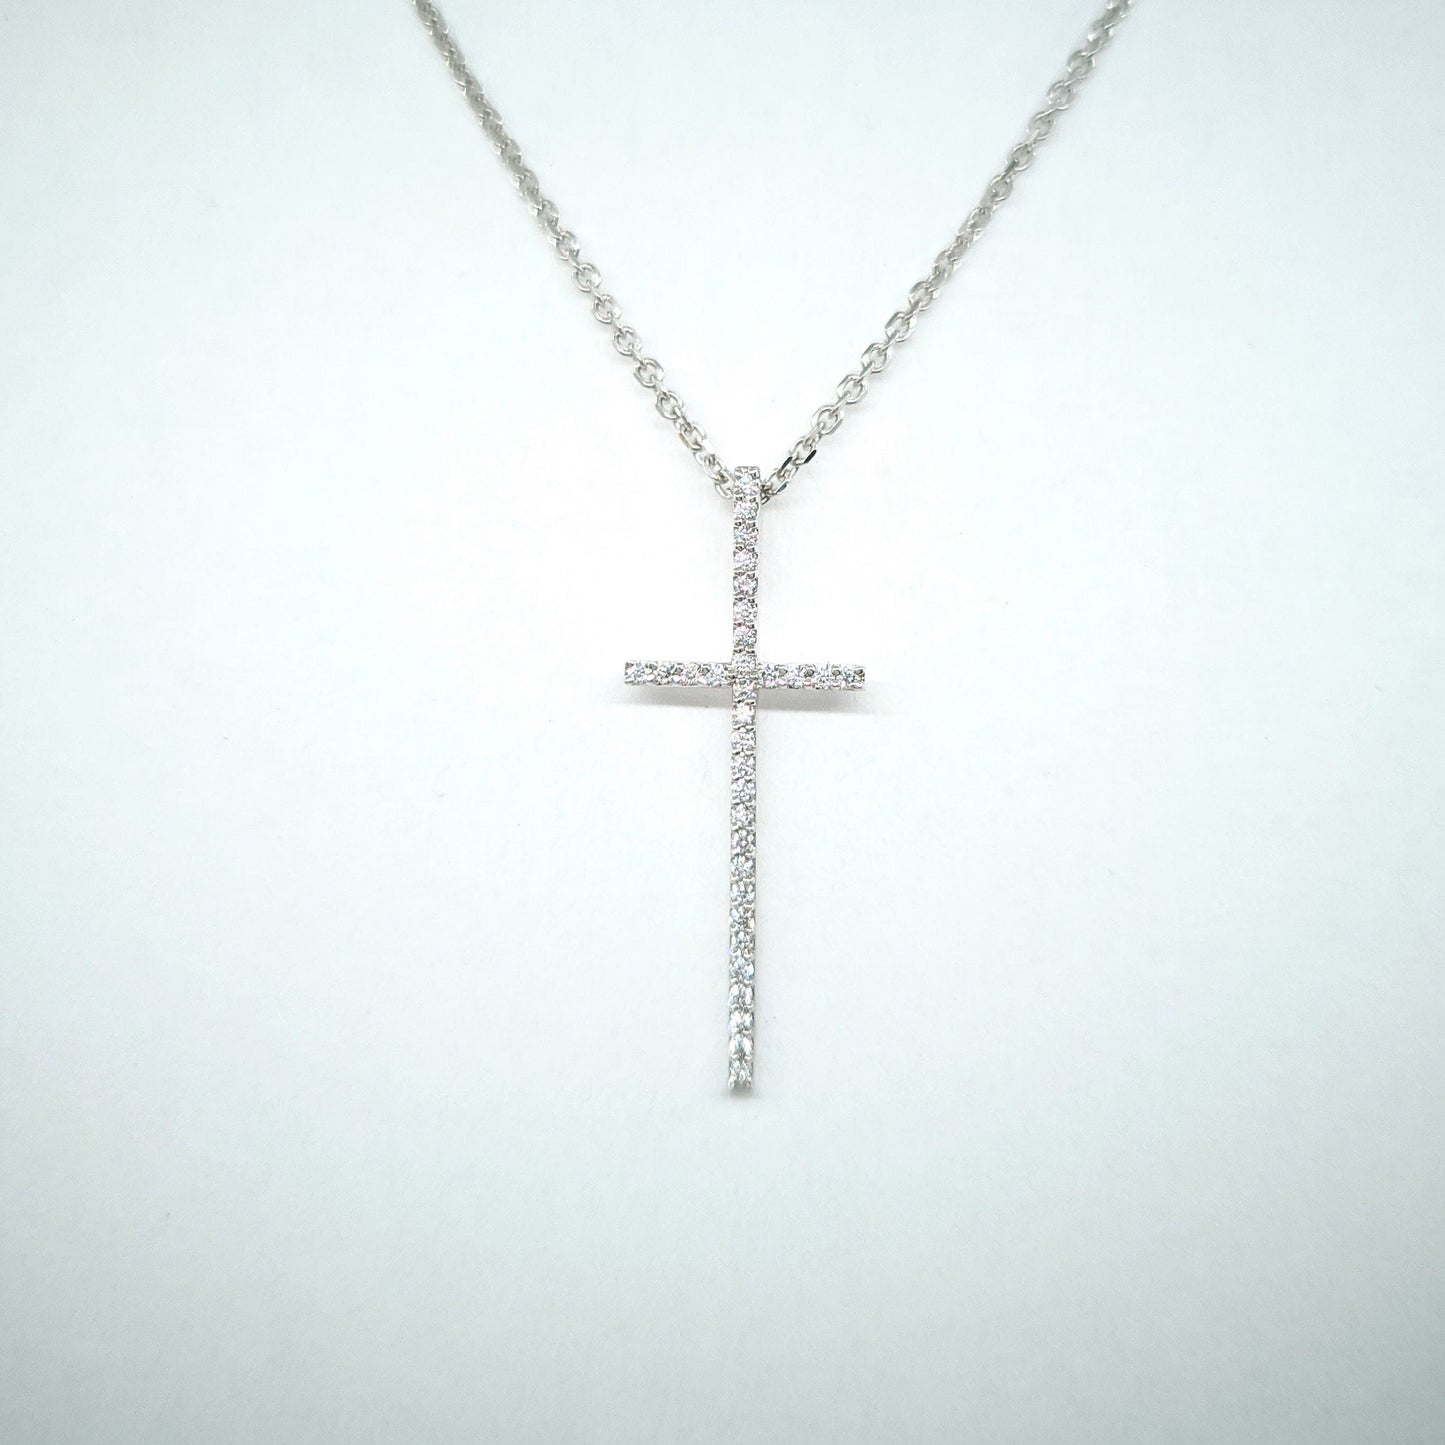 Round Diamond Necklace / 0.12ct Diamond Dainty Simple Cross Necklace / Adjustable Length / 14K Gold Cross Necklace / Gift for Her